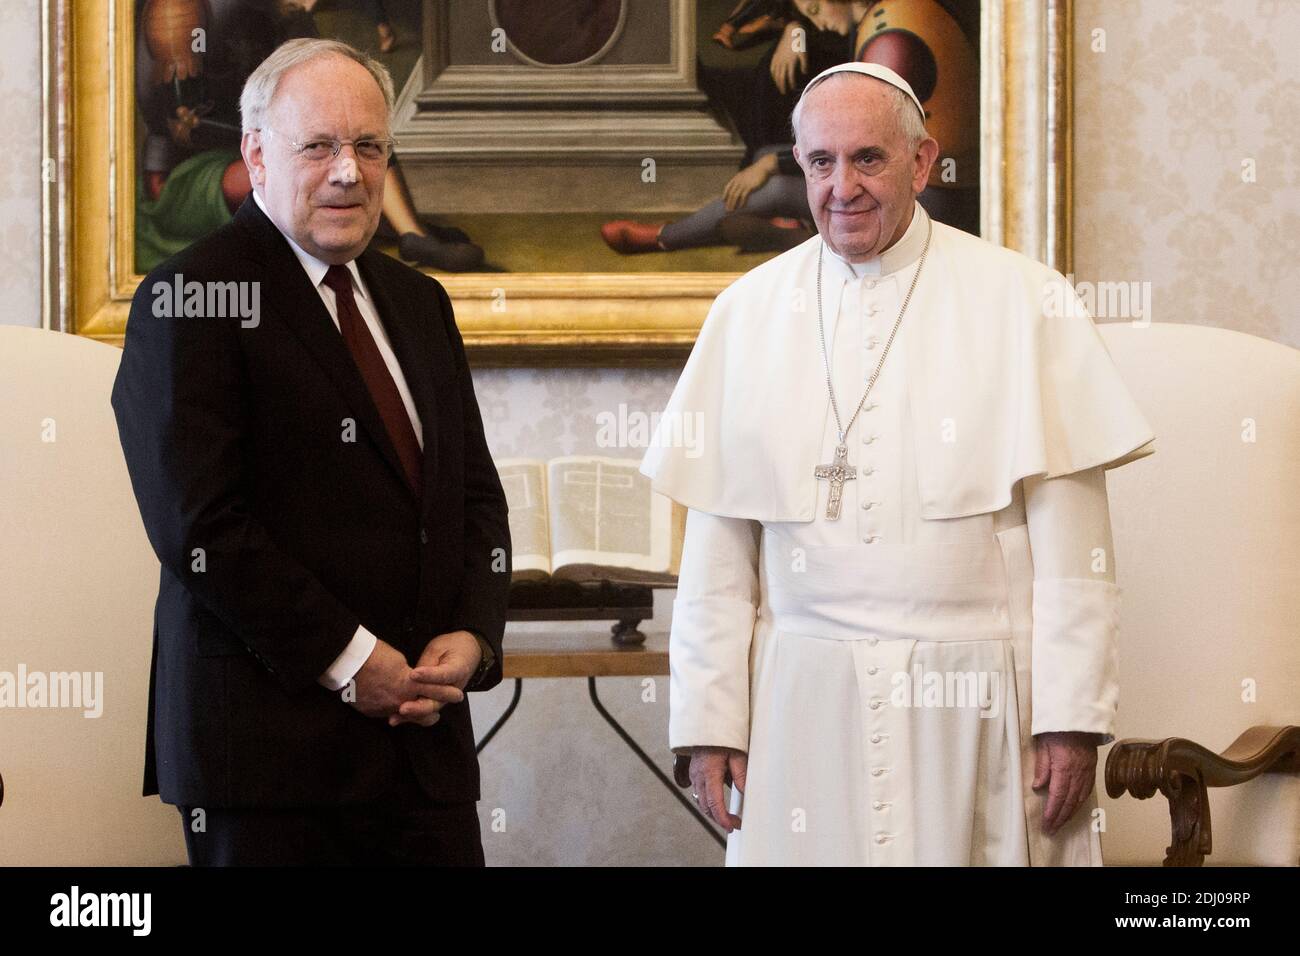 Pope Francis met with Swiss President Johann Schneider-Ammann during a Private audience at the Vatican on May 7, 2016. Photo by ABACAPRESS.COM Stock Photo